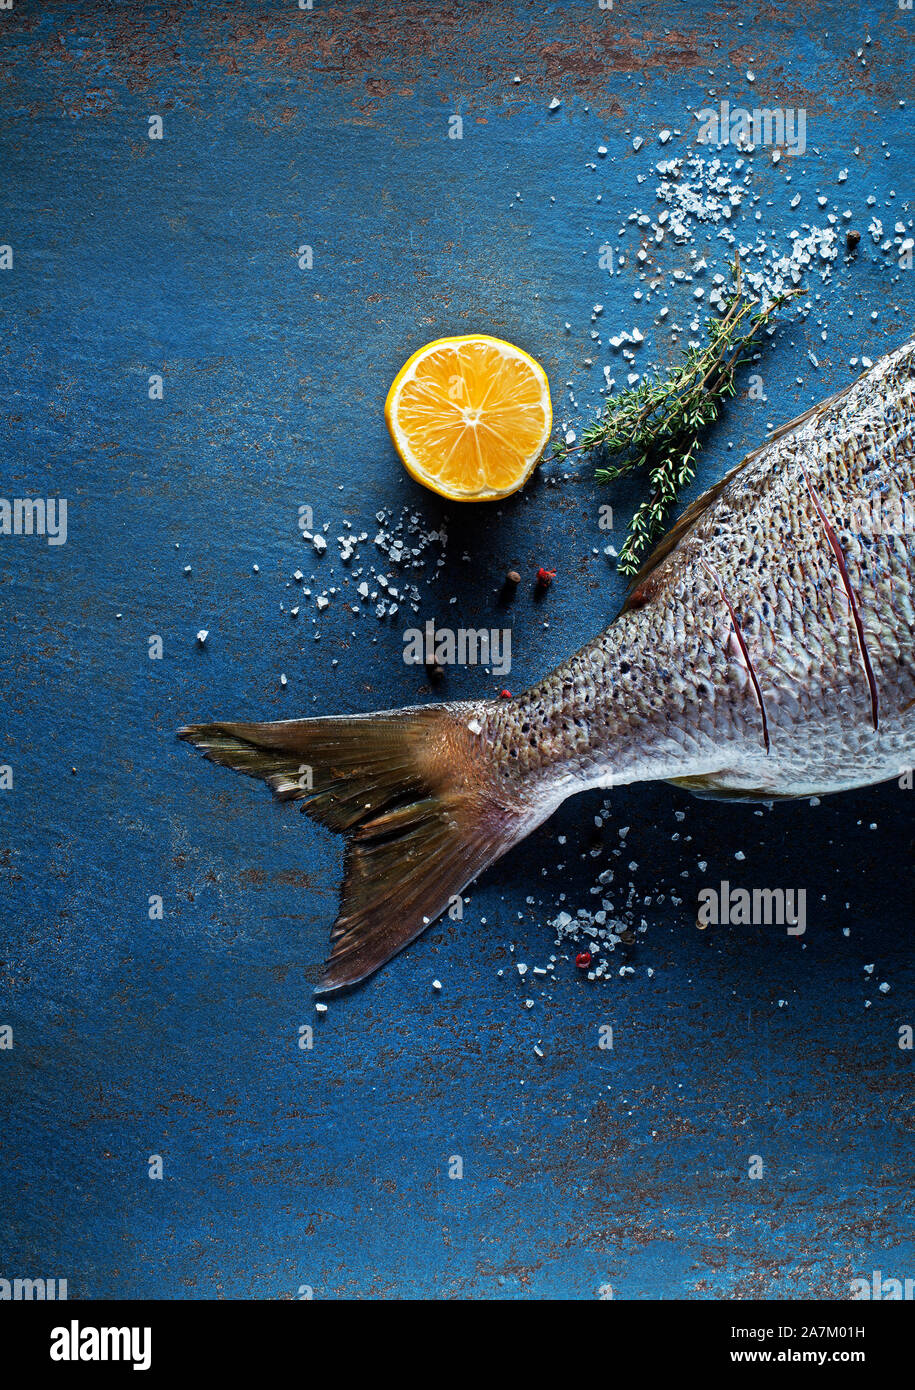 Delicious fresh fish on vintage background. Healthy diet eating or cooking concept Stock Photo